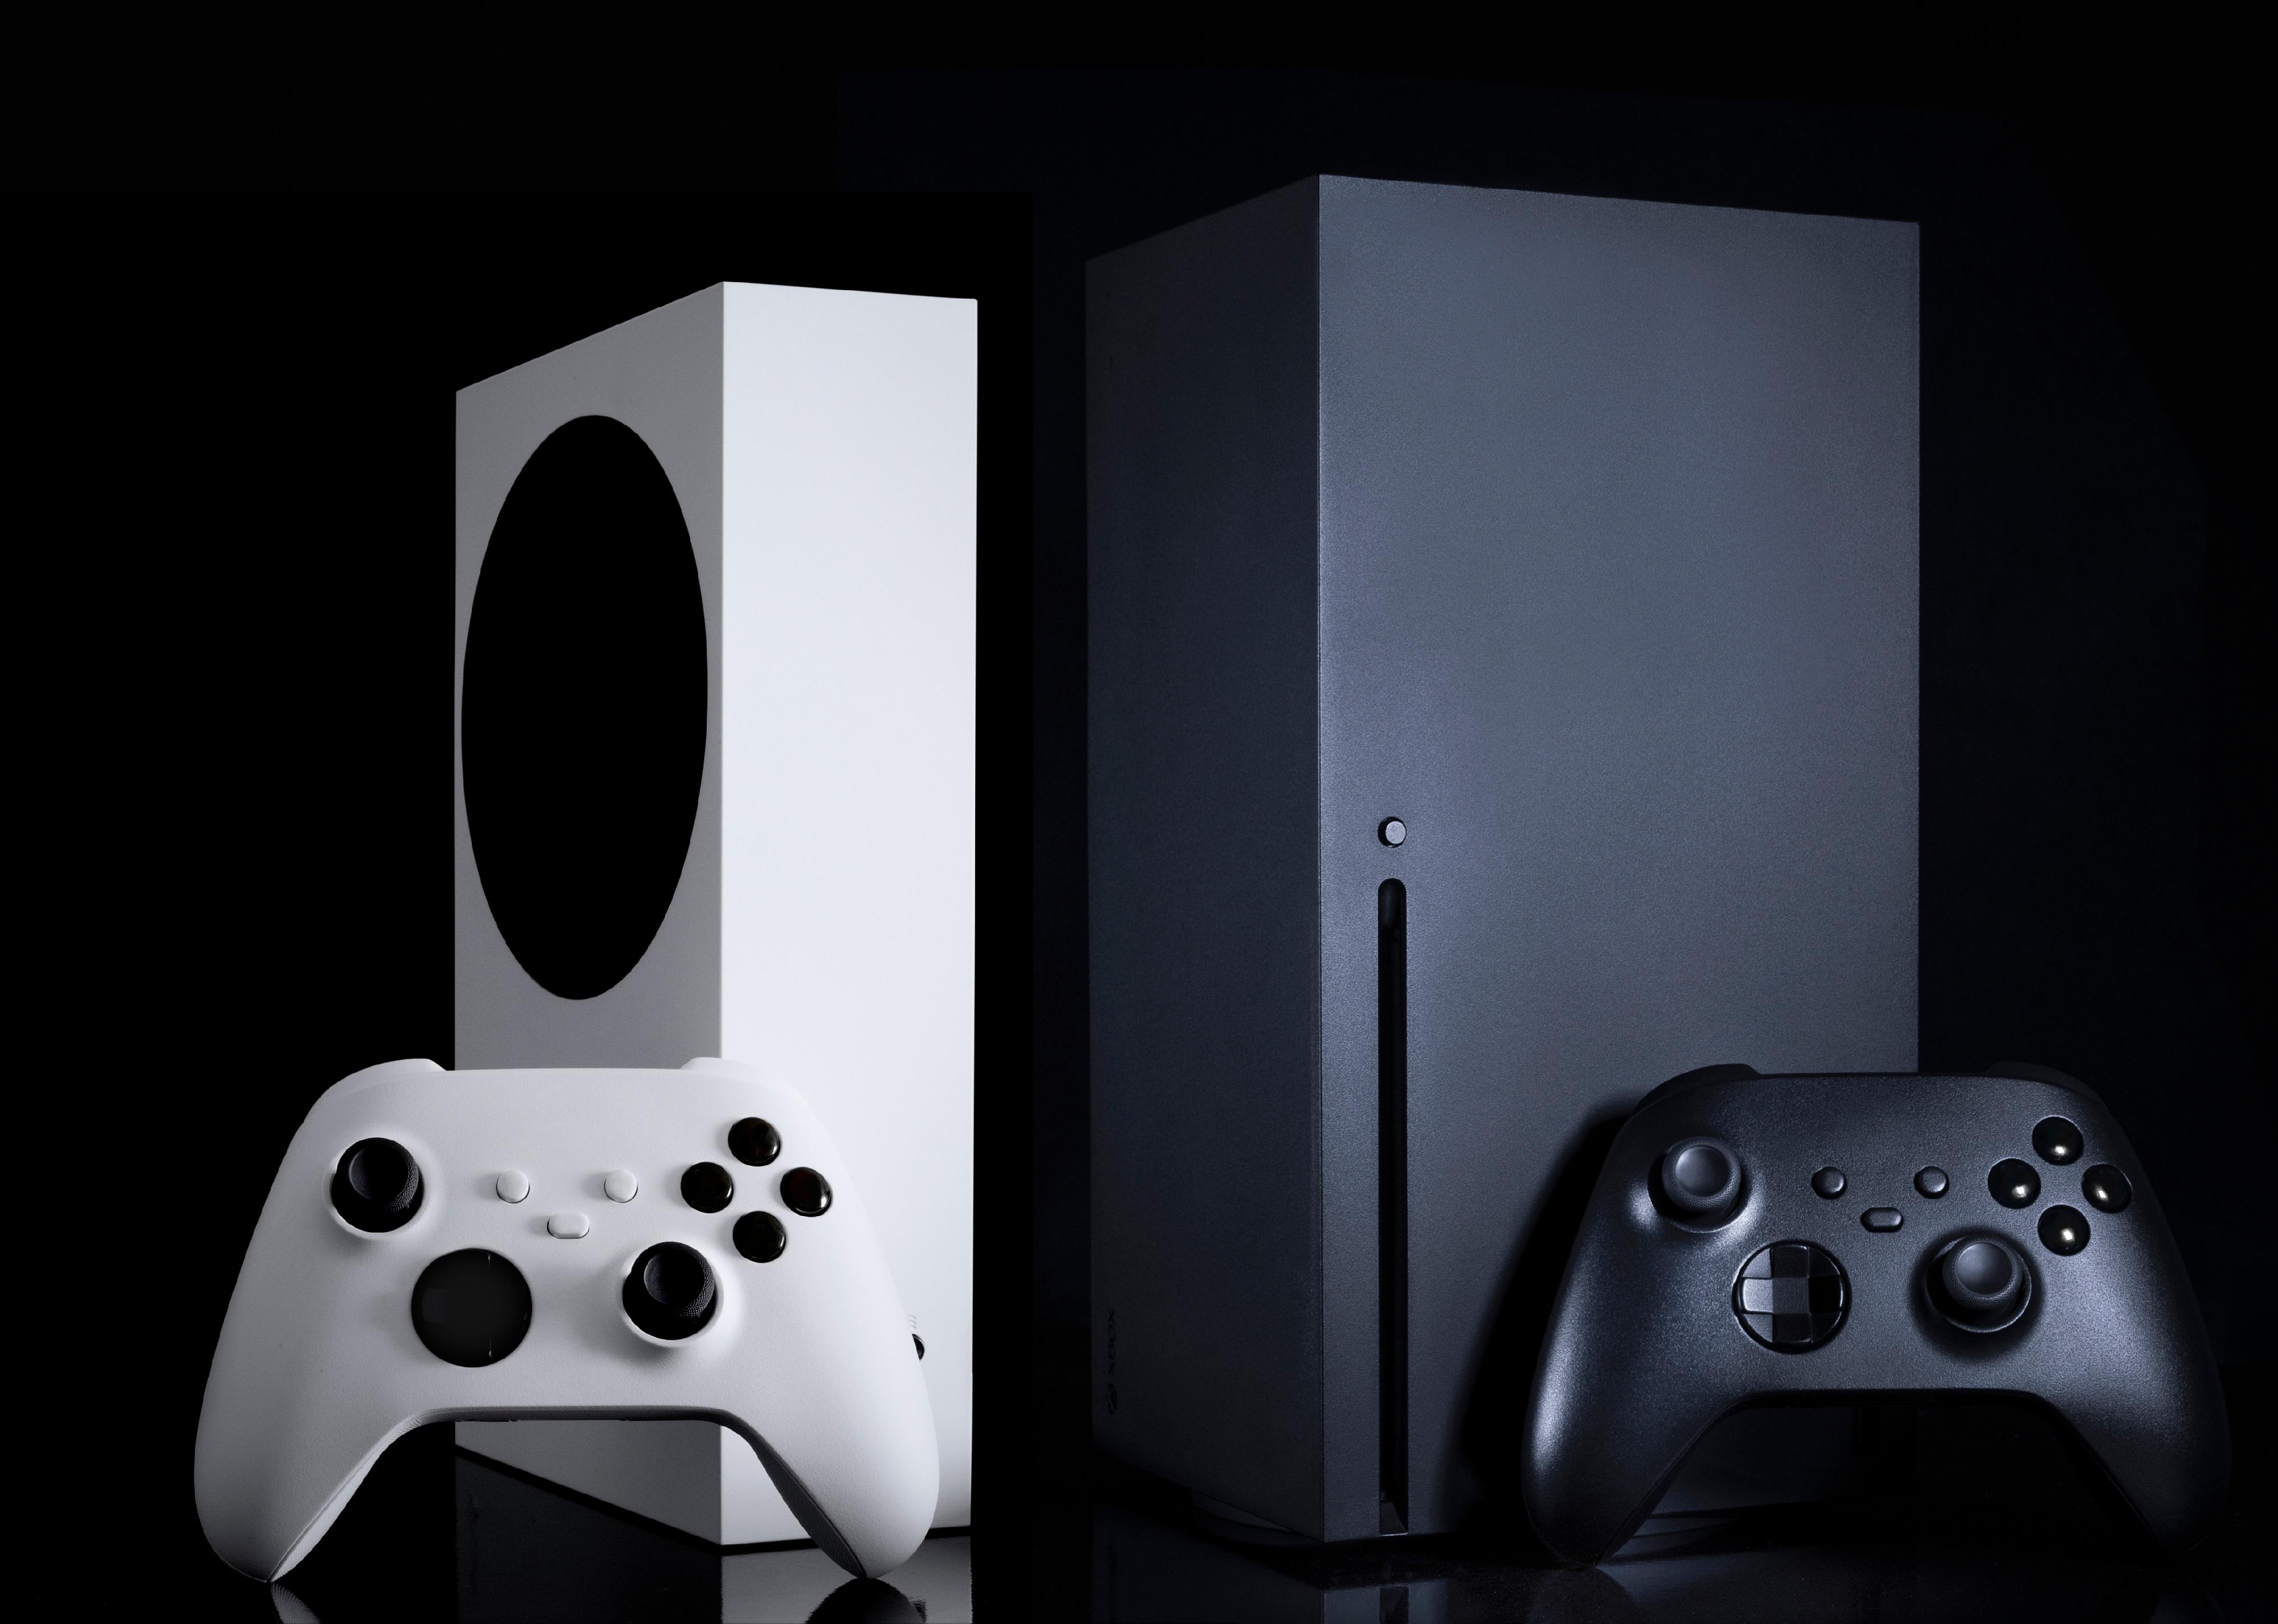 White and black game consoles and controllers with black background.